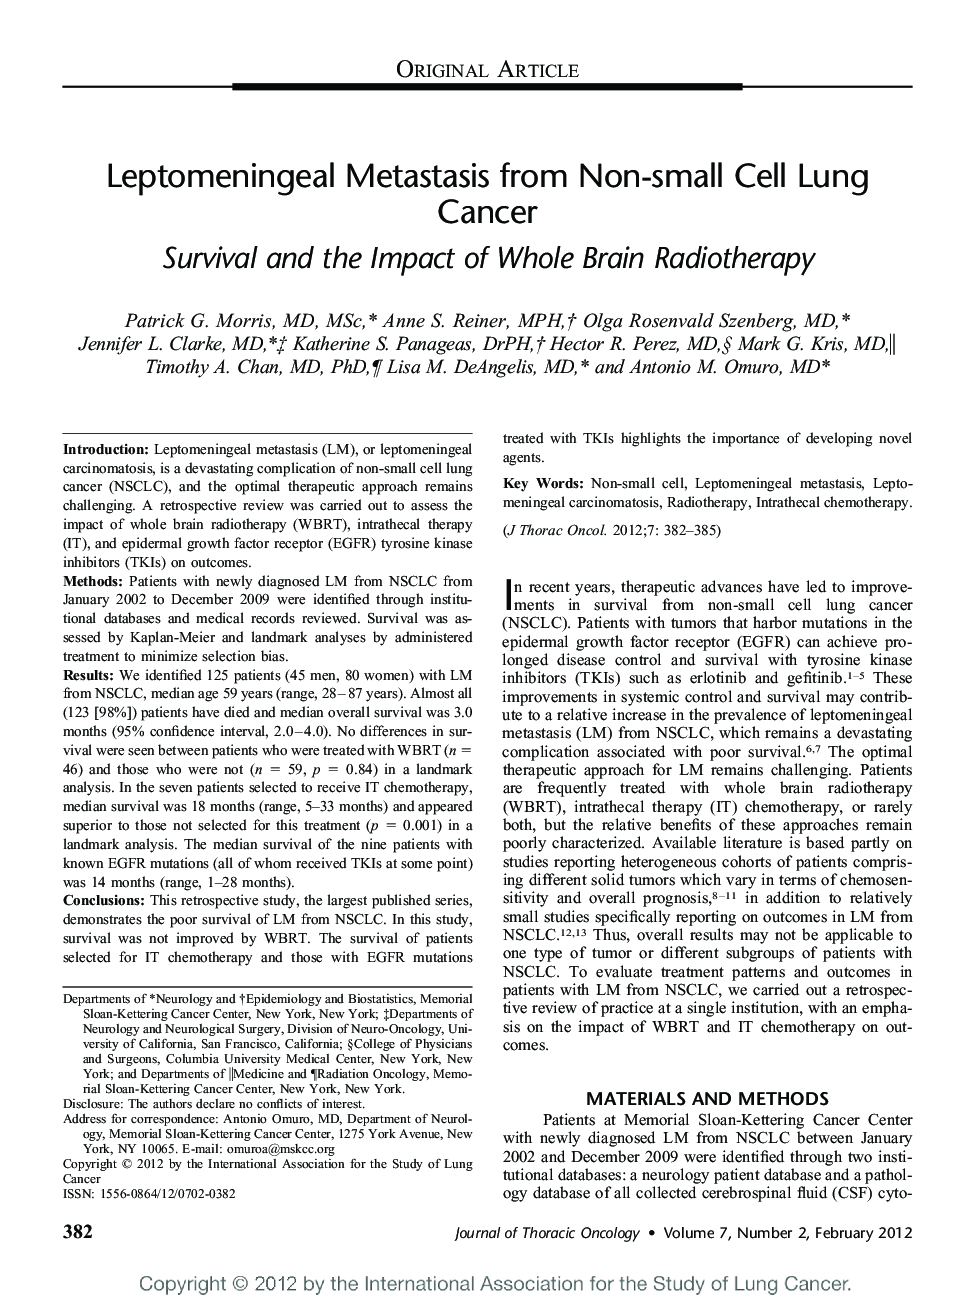 Leptomeningeal Metastasis from Non-small Cell Lung Cancer: Survival and the Impact of Whole Brain Radiotherapy 